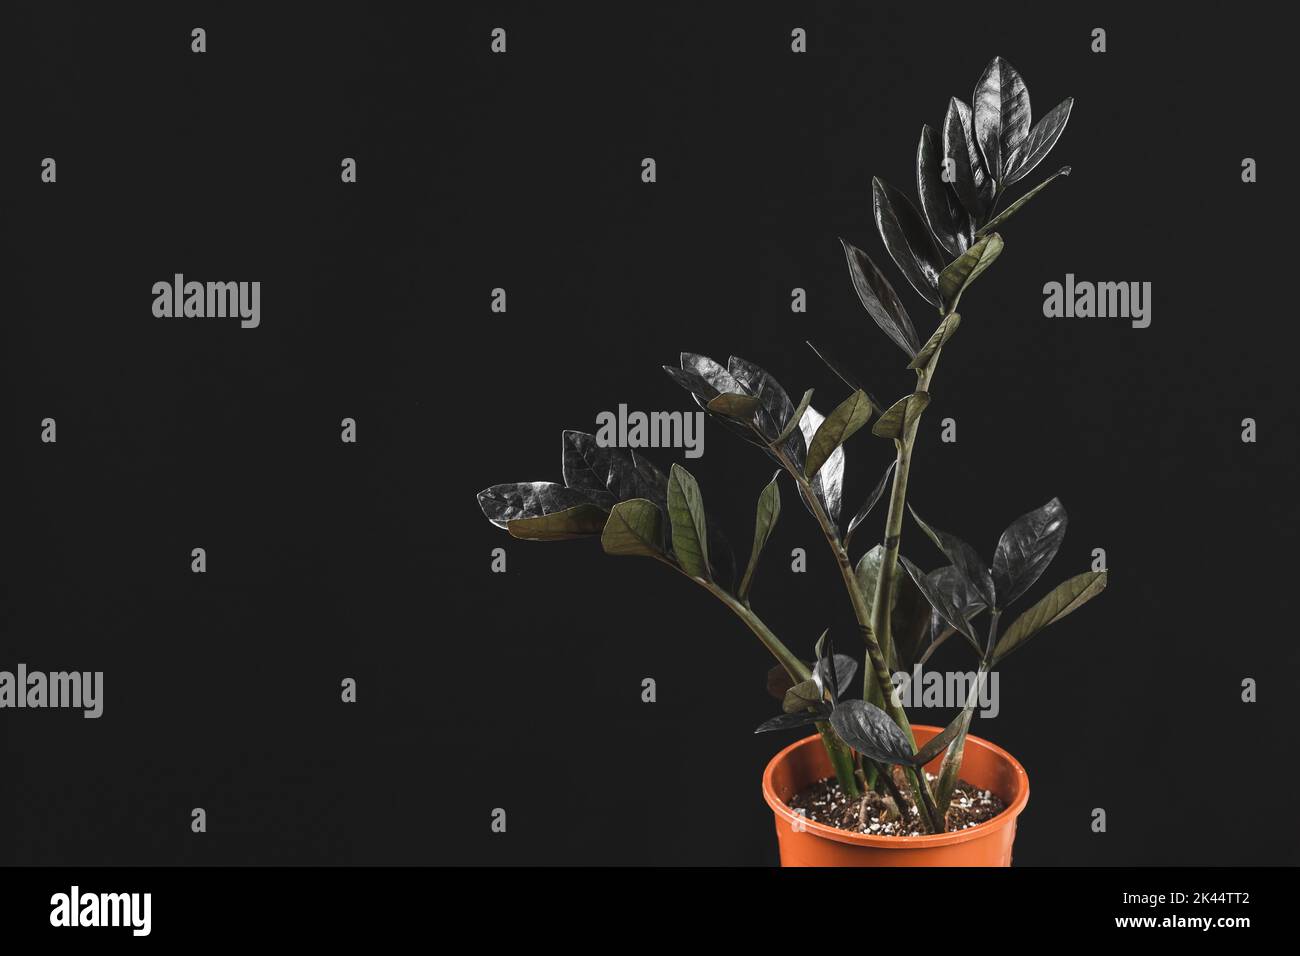 Zamioculcas Zamiifolia Raven, potted house plant with black leaves over black background with copy space. Spooky dark plants collection Stock Photo